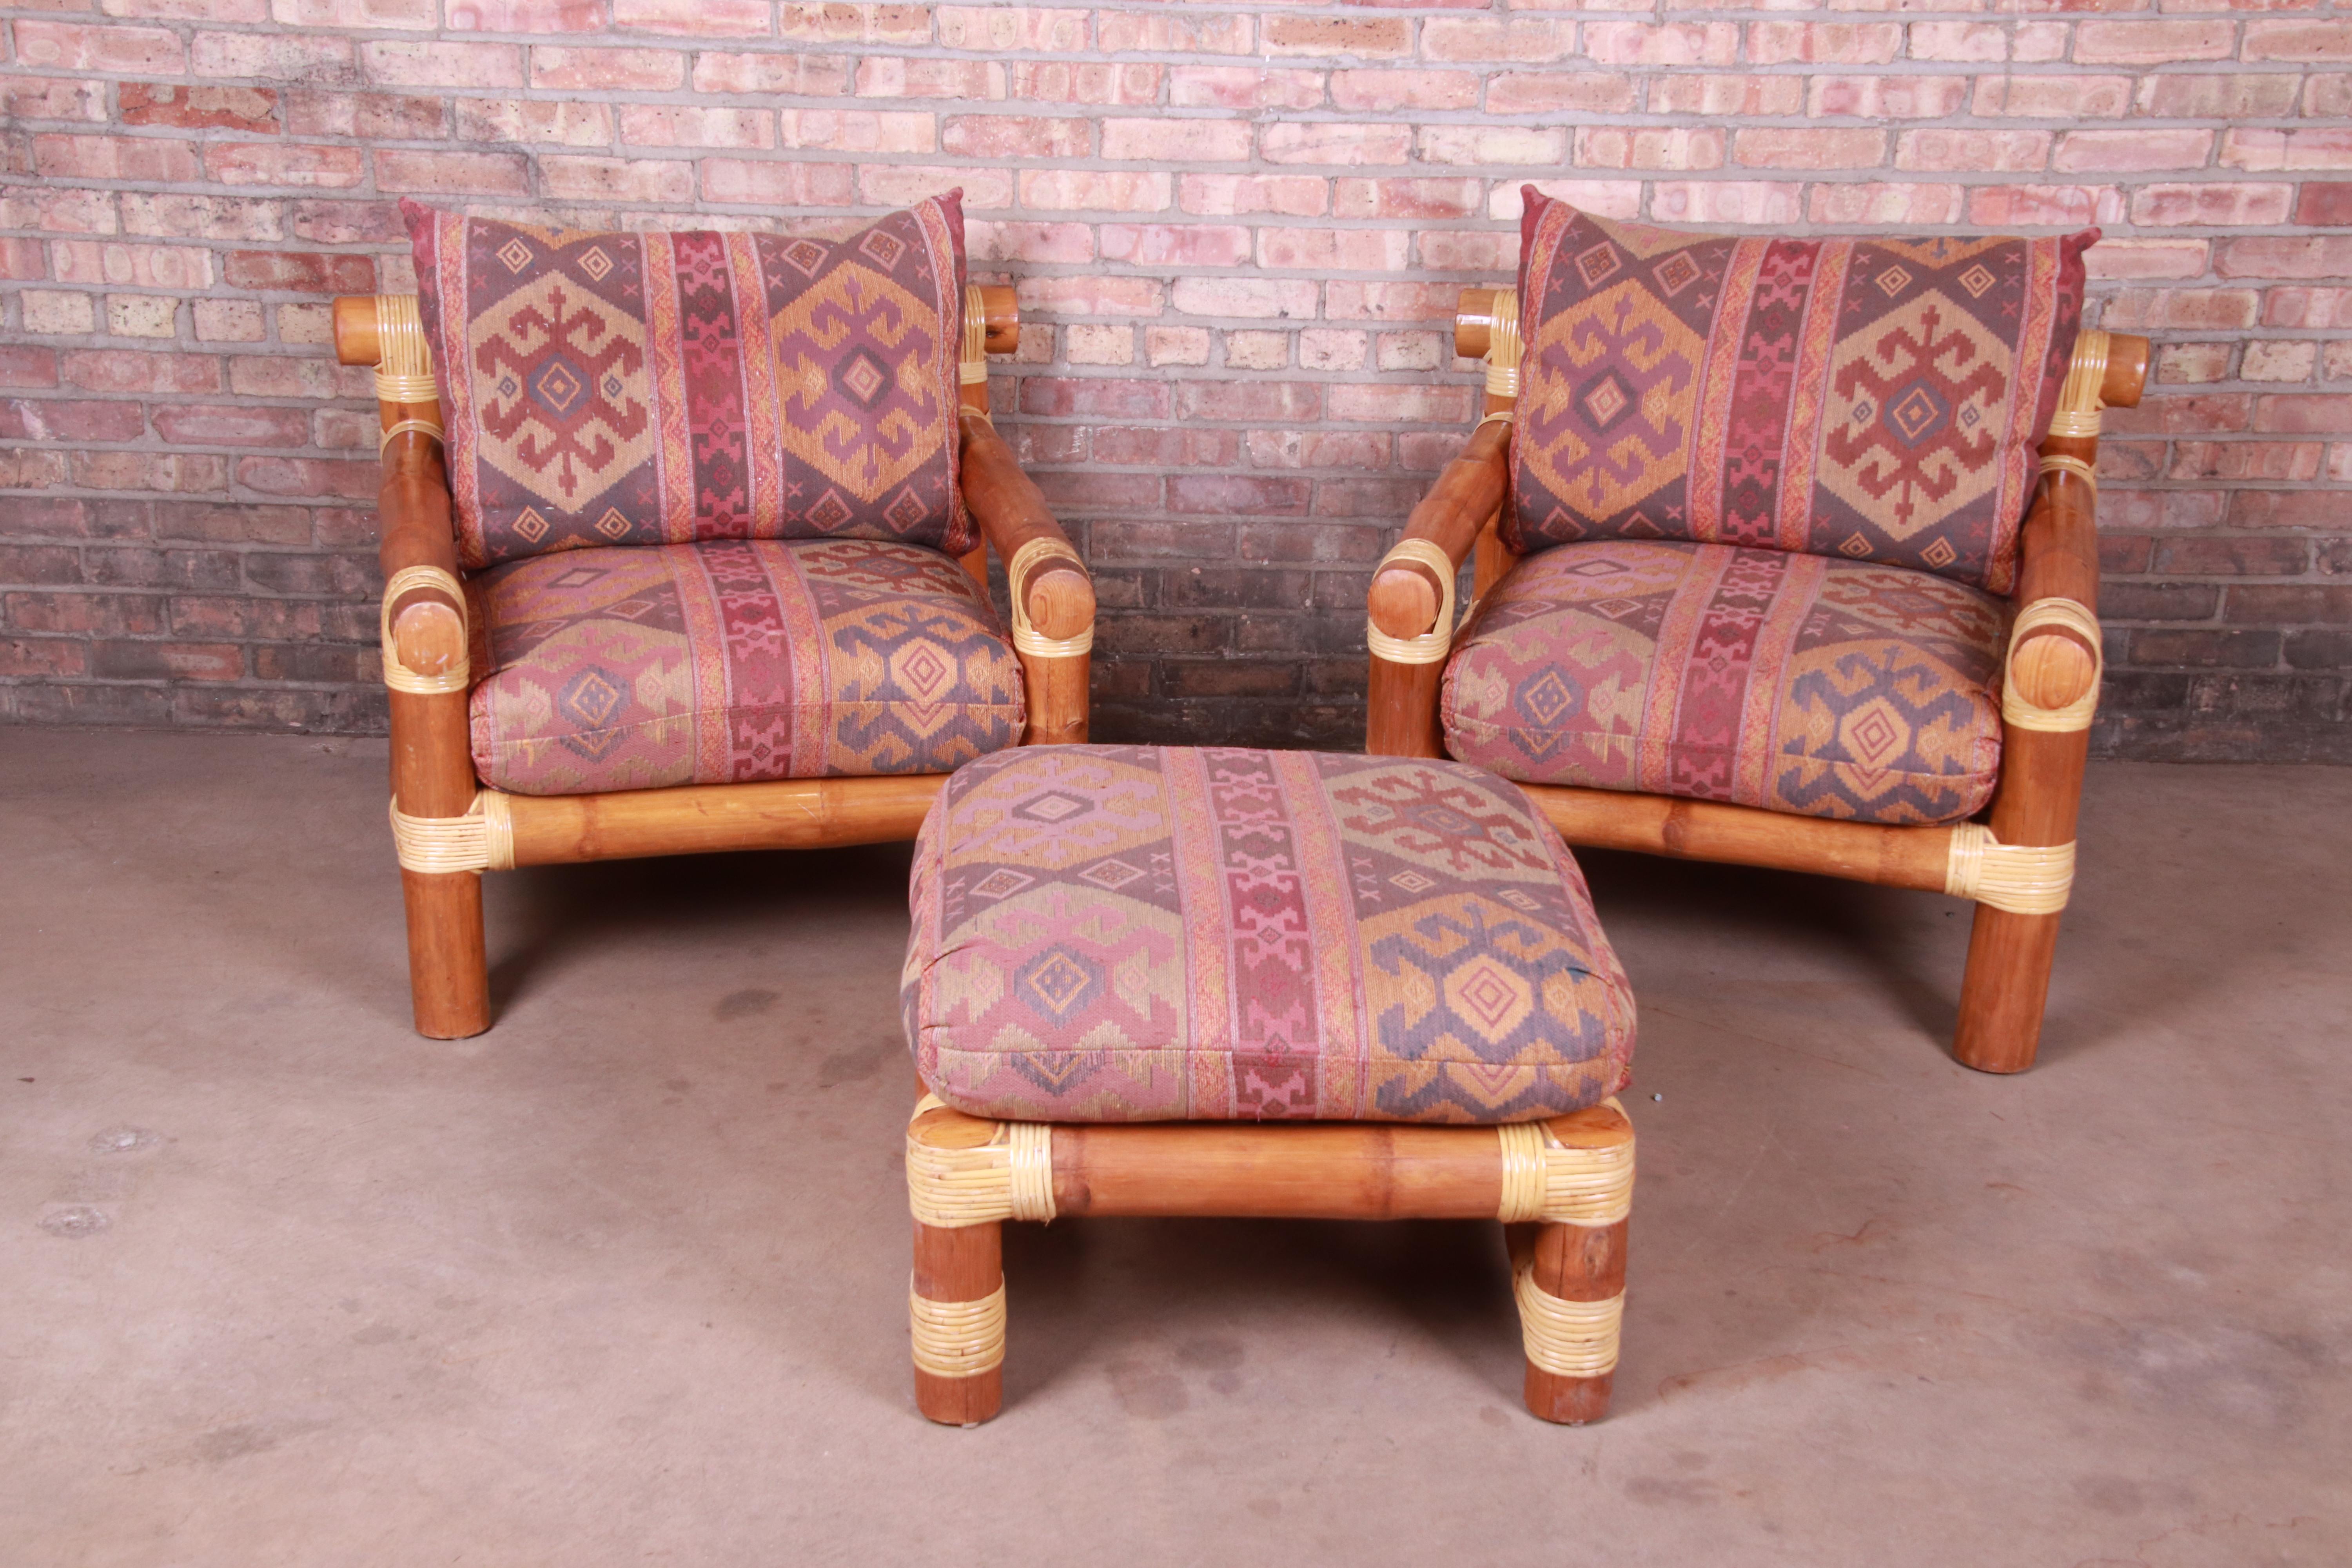 An exceptional pair of oversized bamboo rattan lounge chairs with matching ottoman in Kilim upholstery

Philippines, 20th century

Measures:
Chairs 34.13